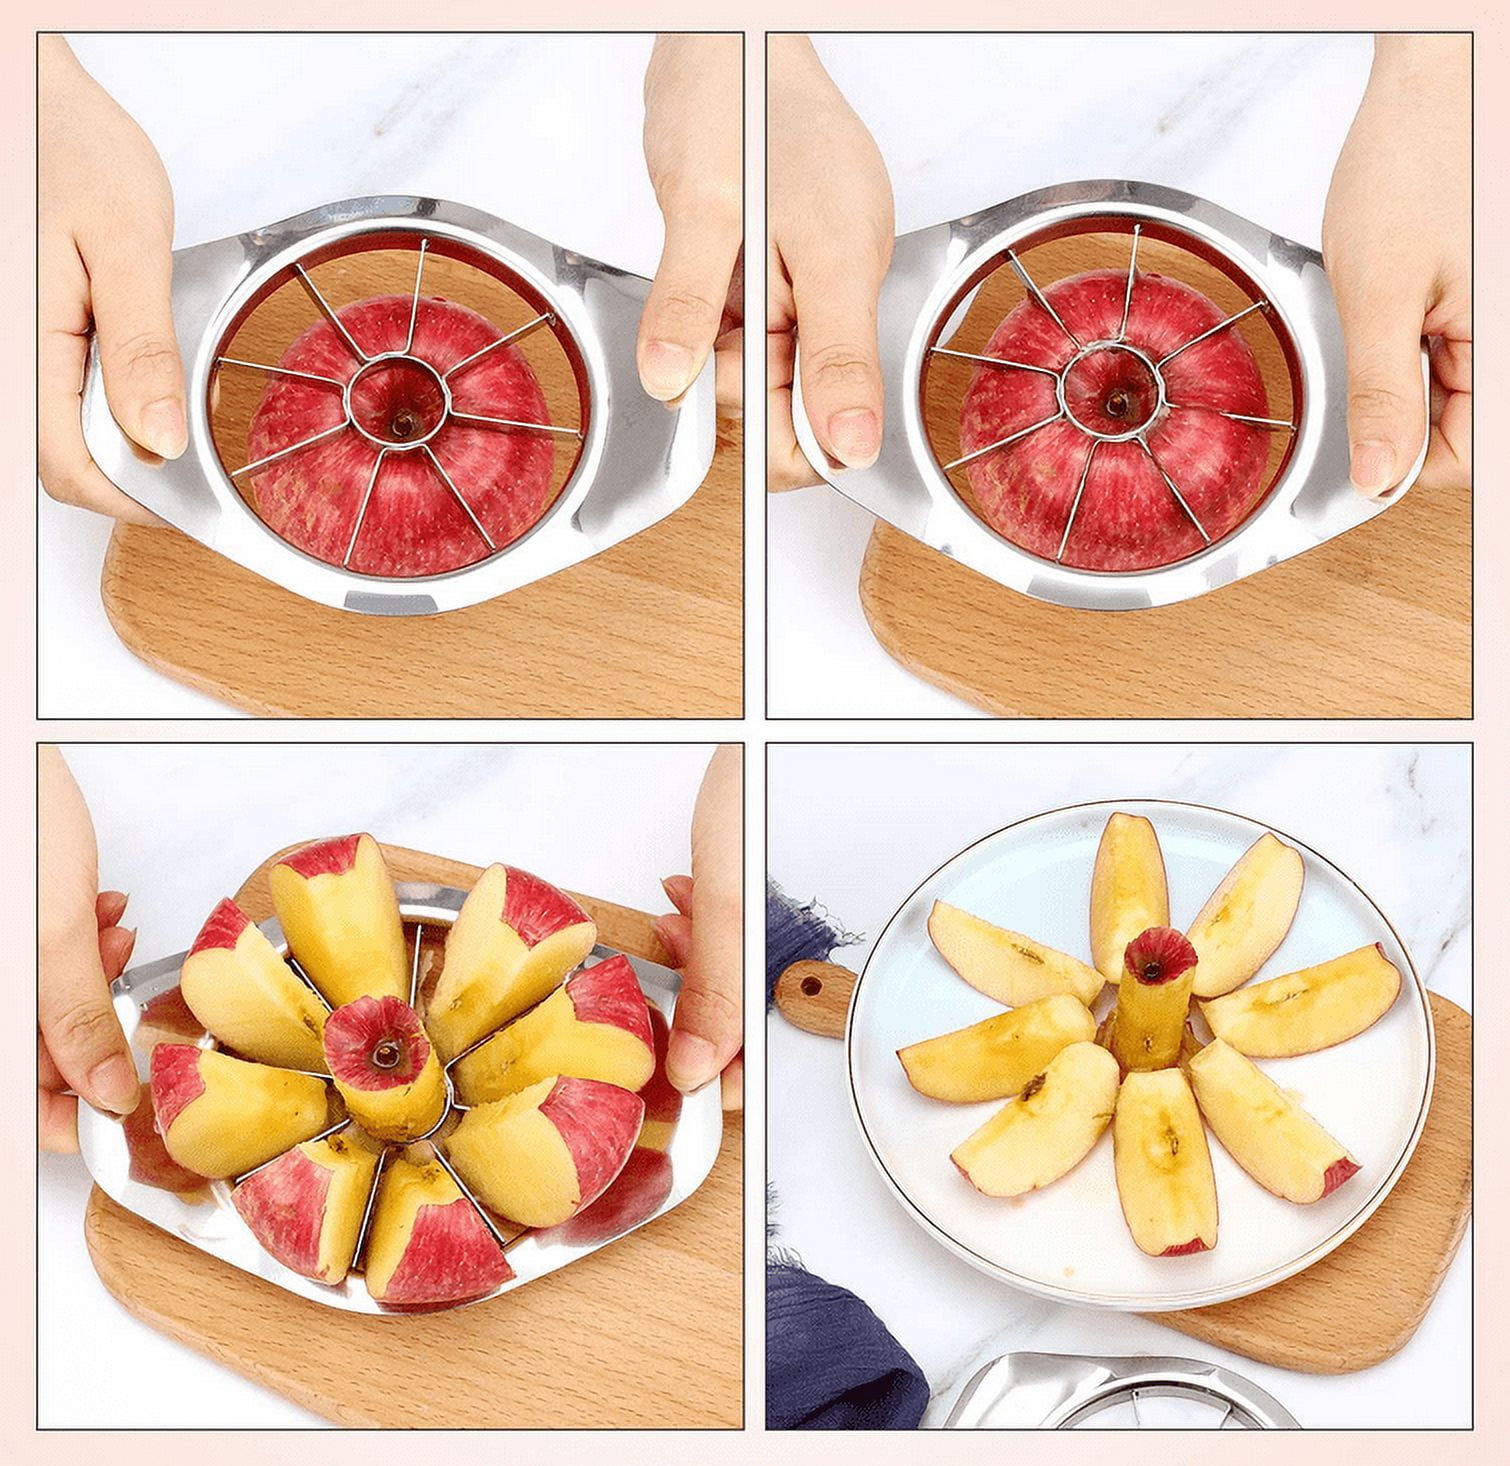 Stainless Steel Ultra-Sharp Apple Cutter, 12-Blade Large Apple Corer,  Upgraded Version Apple Slicer, Remover, Fruit Corer Peeler and Divider for  Up To 4 Inch Apples Cutter Tool 